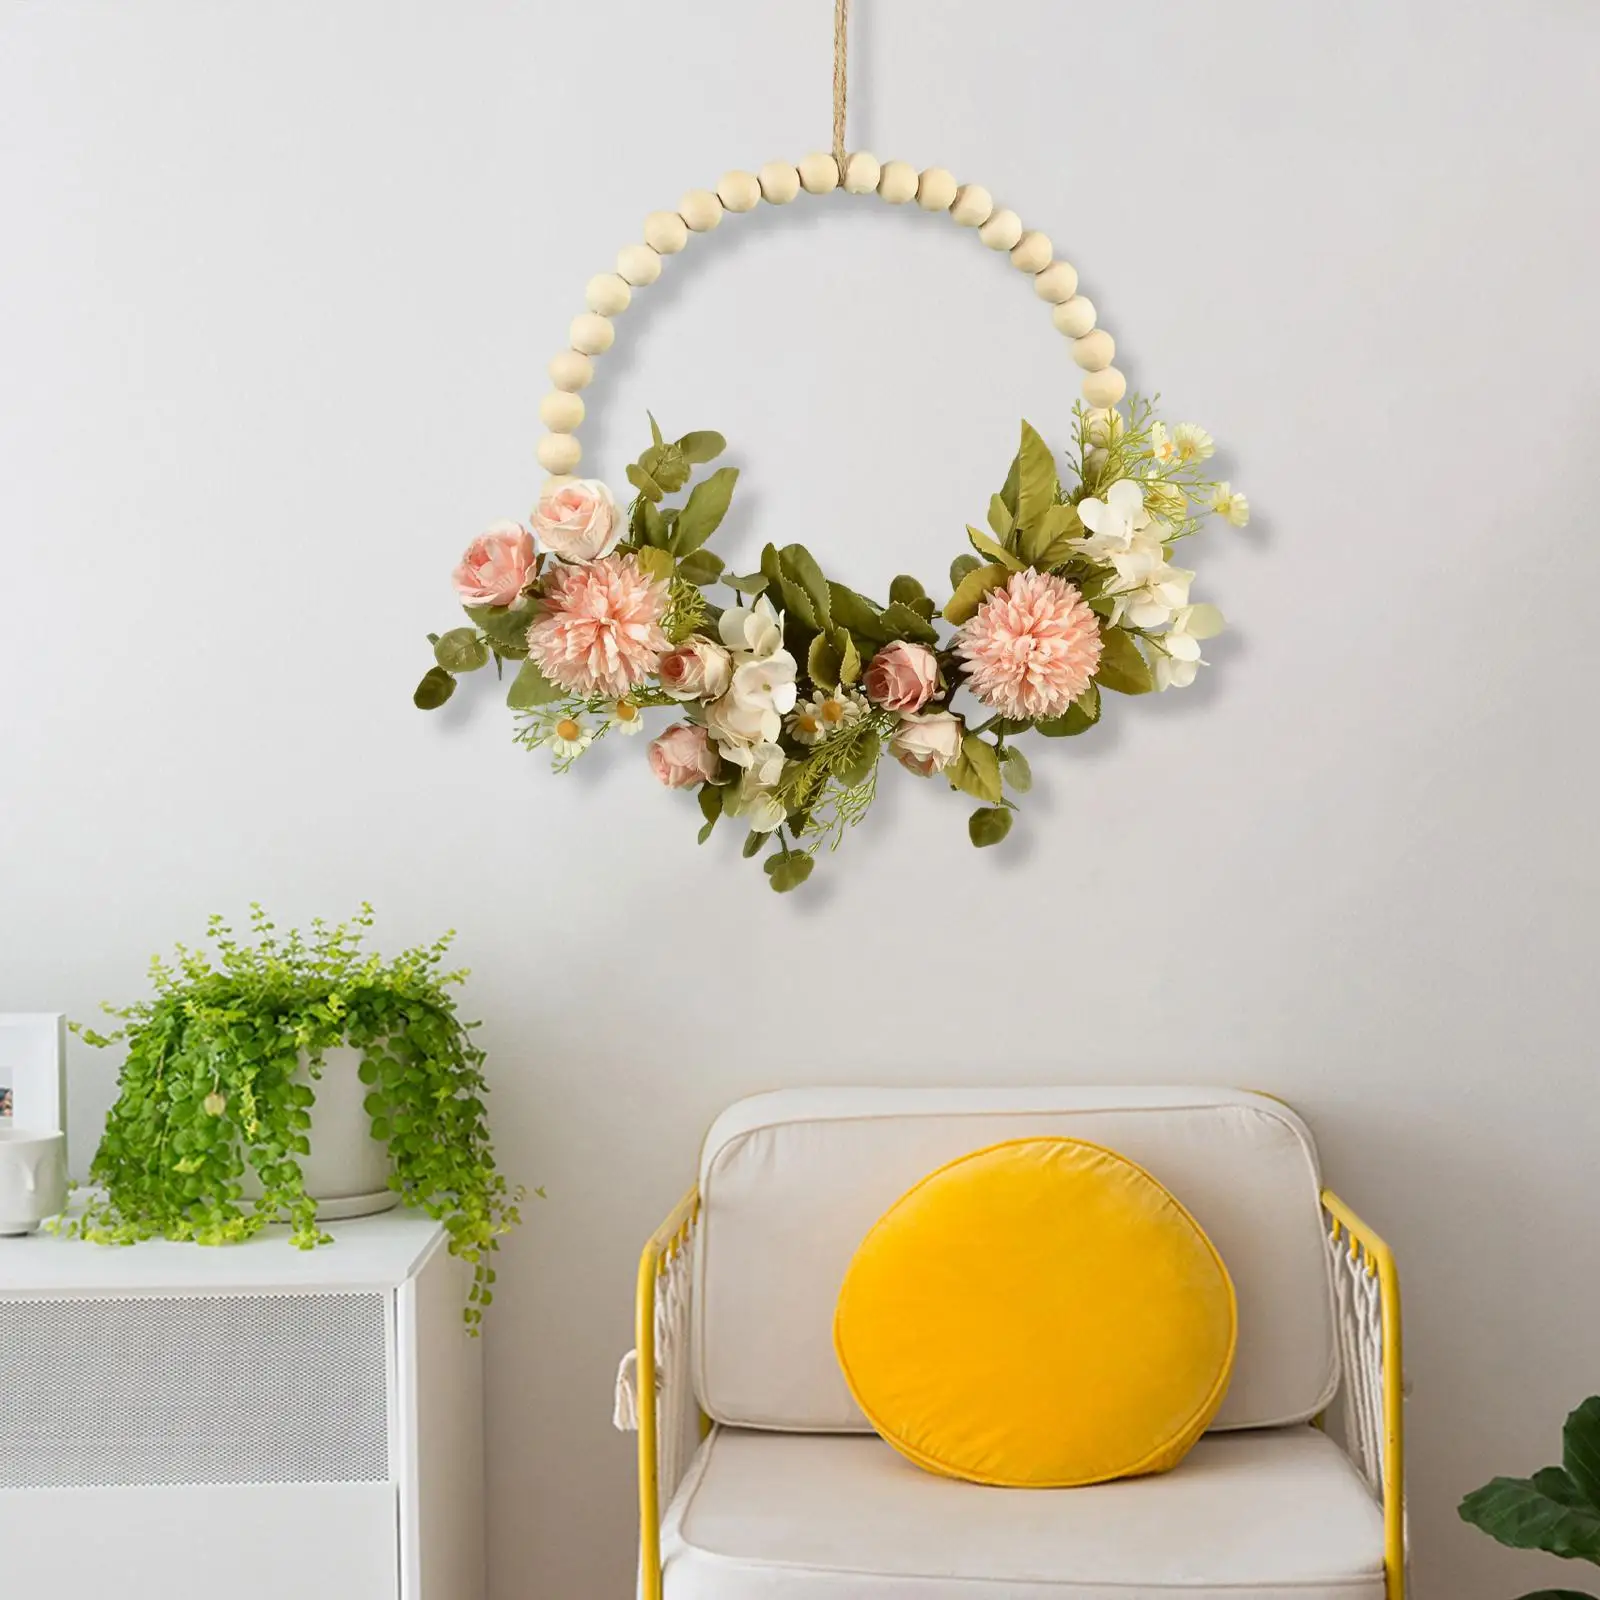 Flower Wreath Garland Door Wooden Beads Circle Hanging Spring Wreath Greenery Leaves for Indoor Outdoor Fireplace Decor